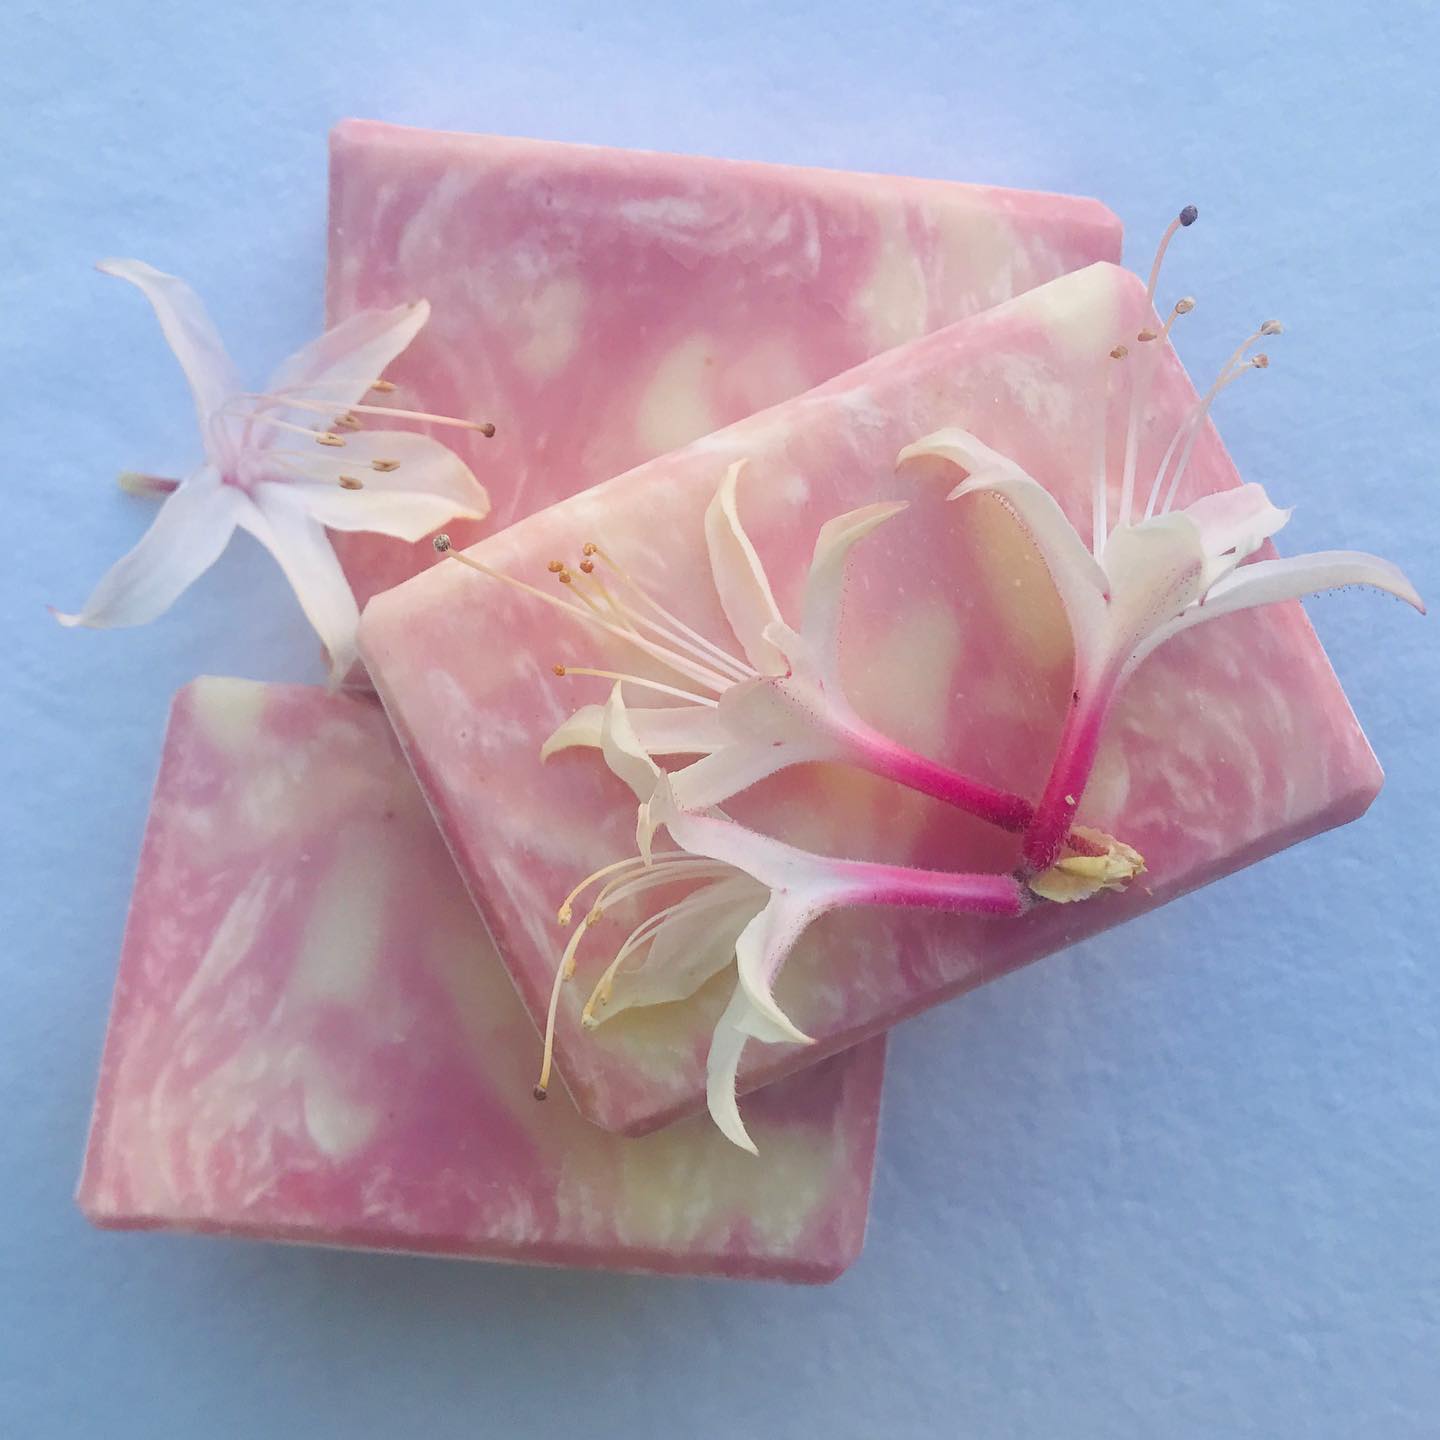 Mother’s Day gifts? I got you covered. Come find me at the Brookland Farmers Market today. I’m here until 1 pm.

This lovely floral scented soap is called Meadow. It’s part of the Spring Collection, and not available online. Come shop in person to find the latest Mayapple Soaps. 

If you can’t make it to the market today, stay tuned for a shop update Monday. It’s not too late to ship items to mom! 🌸🌸🌸

#monroestreetmarket #artswalk #brookland #brooklanddc #artswalkdc #monroestreetmarketdc #washingtondc #weekendmarkets #thingstodoindc #naturalsoap #springcollection #mothersdayideas #shoplocal #202creates #imadeyoursoap #dcmakers